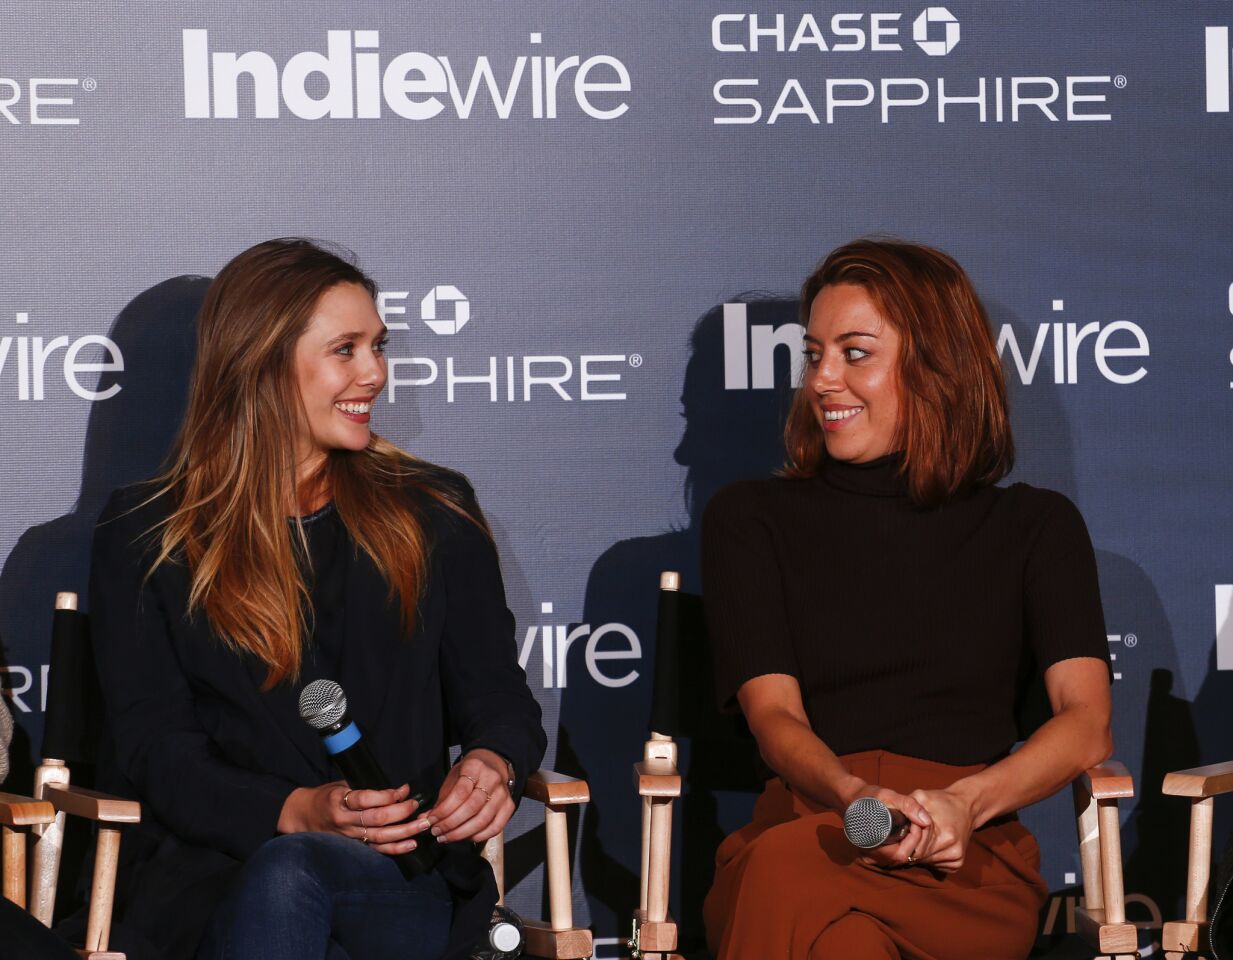 Actresses Elizabeth Olsen, left, and Aubrey Plaza from "Ingrid Goes West" during the "Indiewire in Conversation" panel at Chase Sapphire on Main.